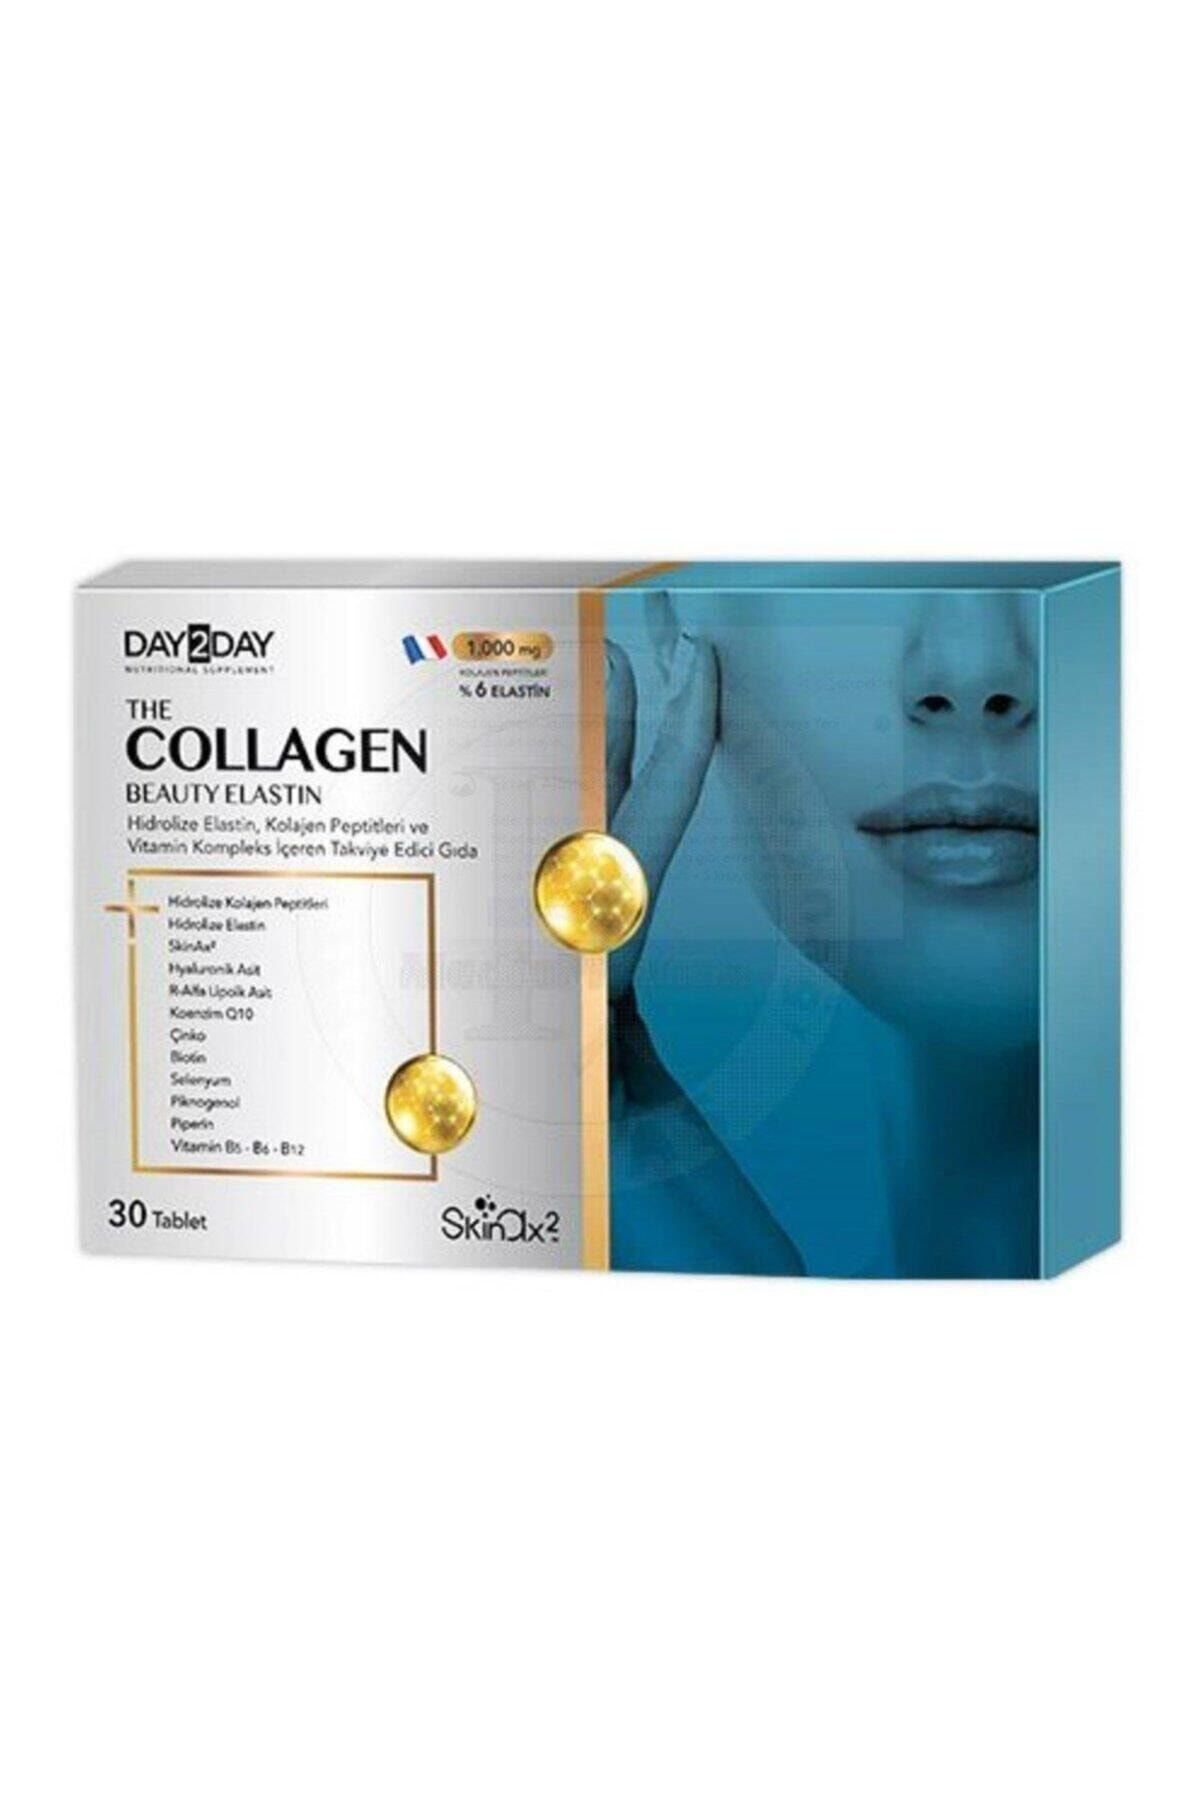 DAY2DAY The Collagen Beauty Elastin 30 Tablet